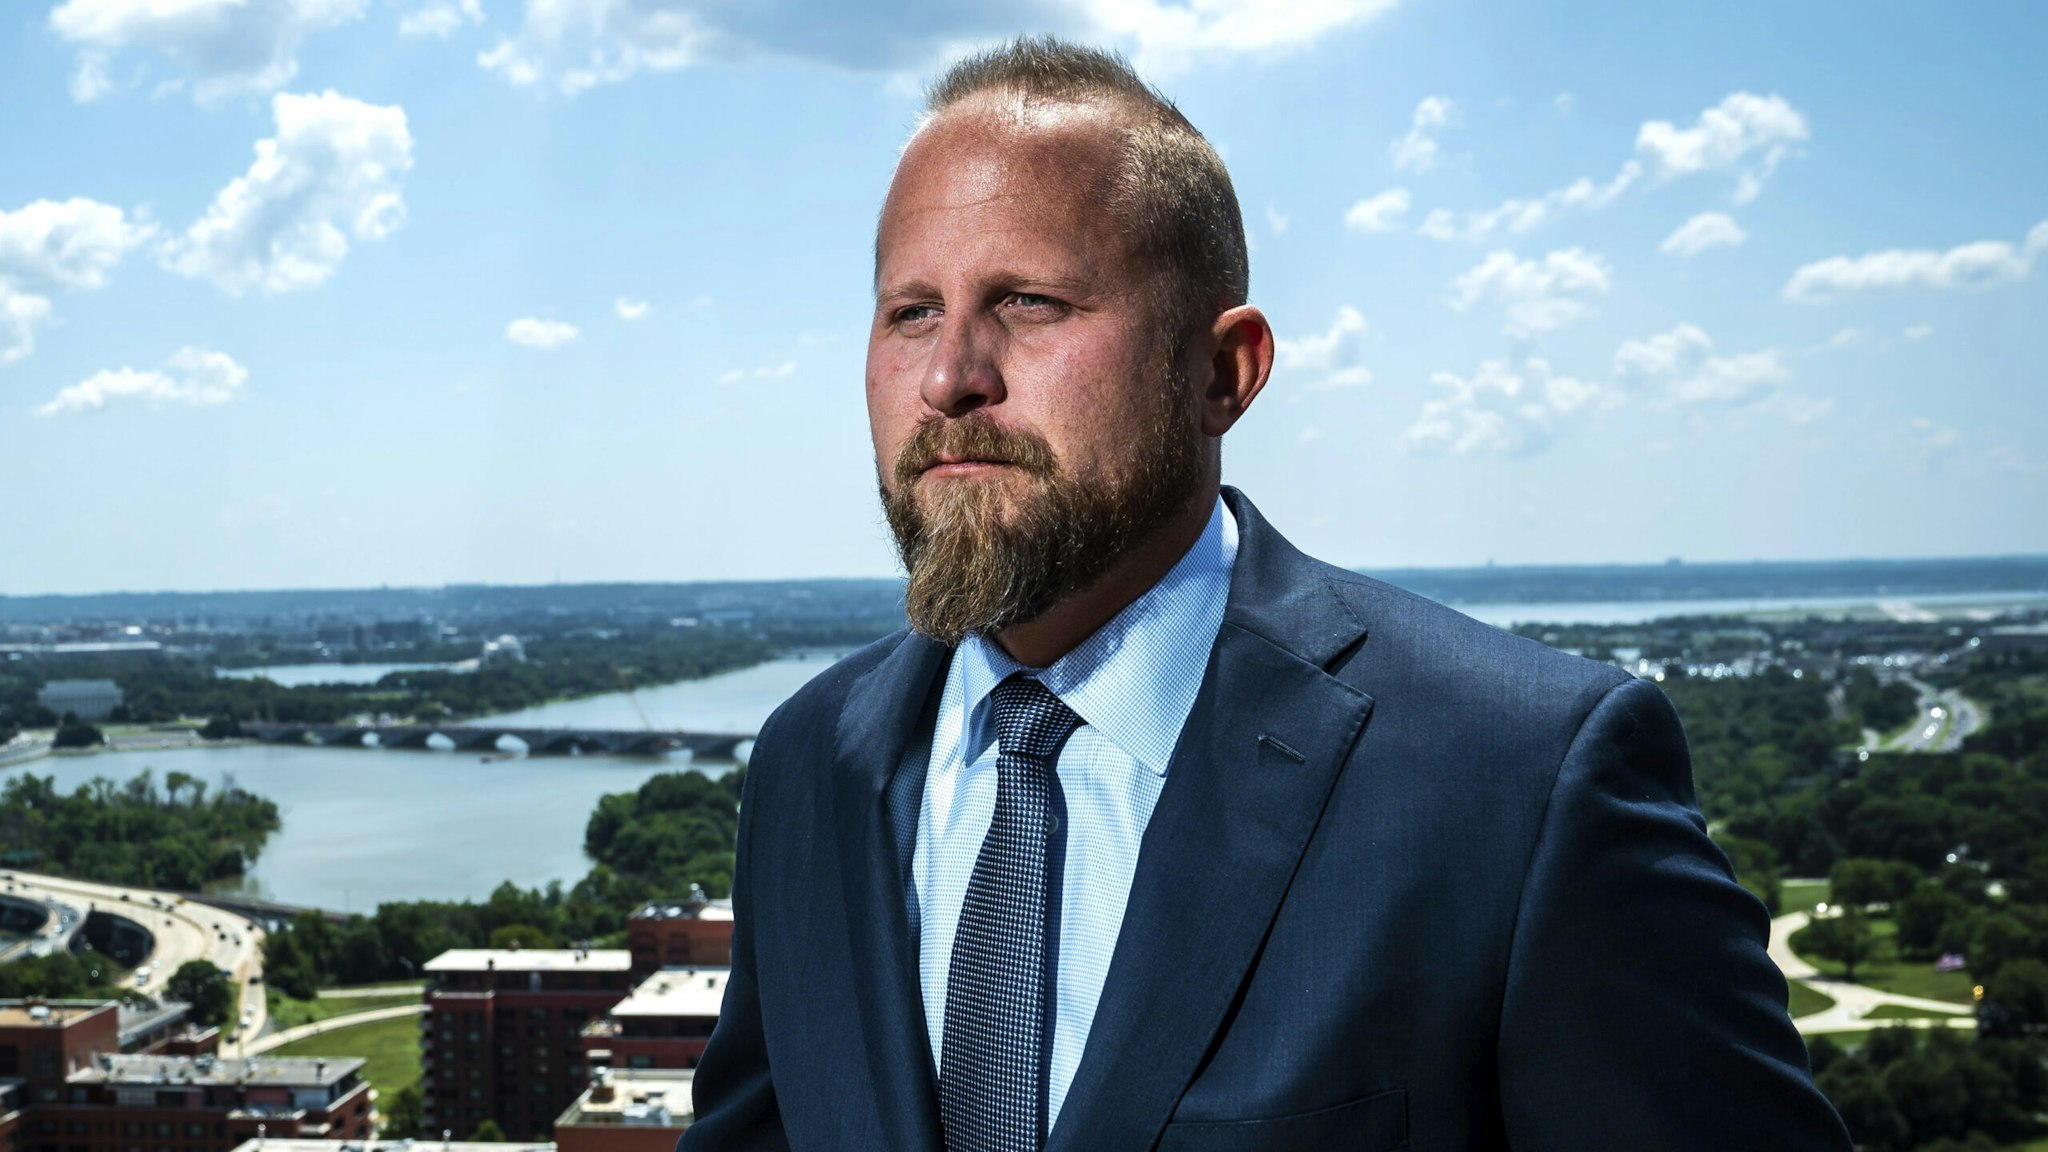 ARLINGTON, VA - JULY 25 : Campaign Manager for President Donald J. Trump's 2020 Presidential Campaign Brad Parscale poses for a portrait at the Northern Virginia campaign headquarters on Thursday, July 25, 2019 in Arlington, VA.